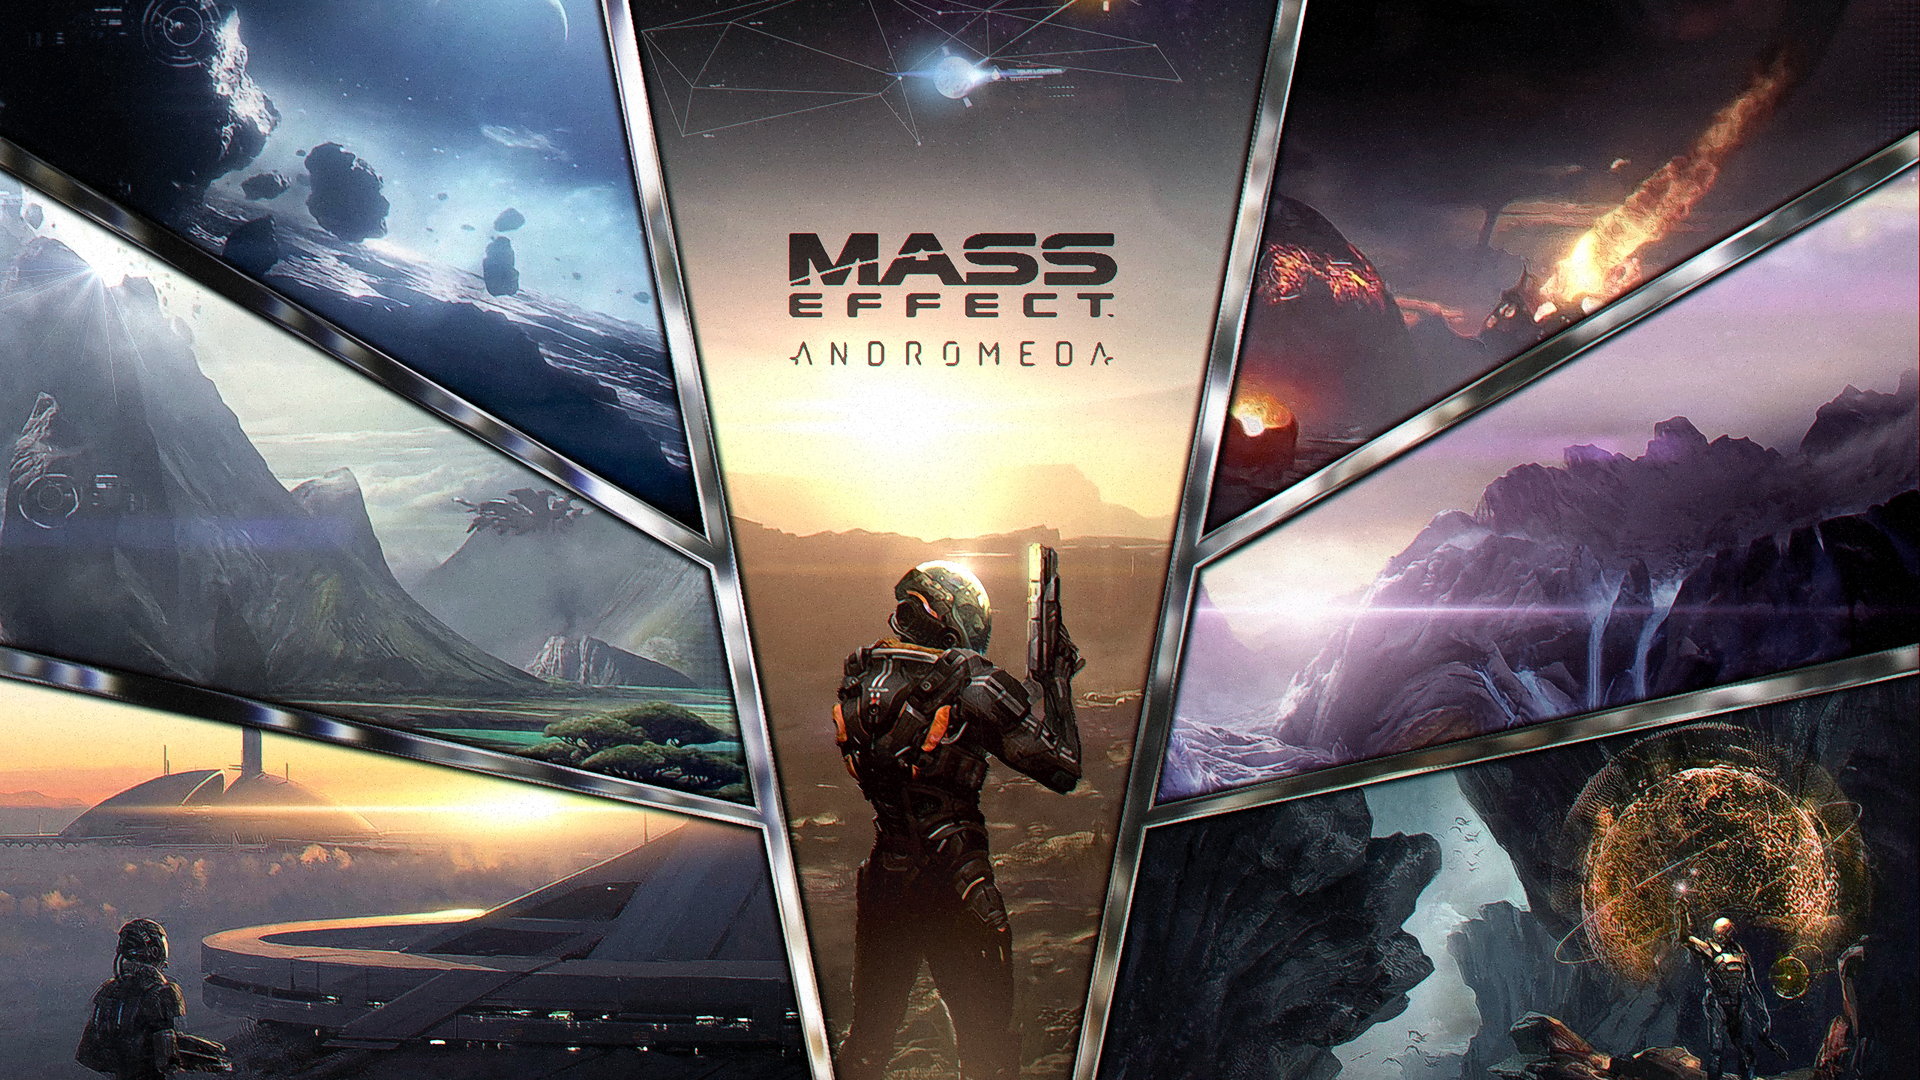 Video Game Mass Effect Andromeda 1920x1080